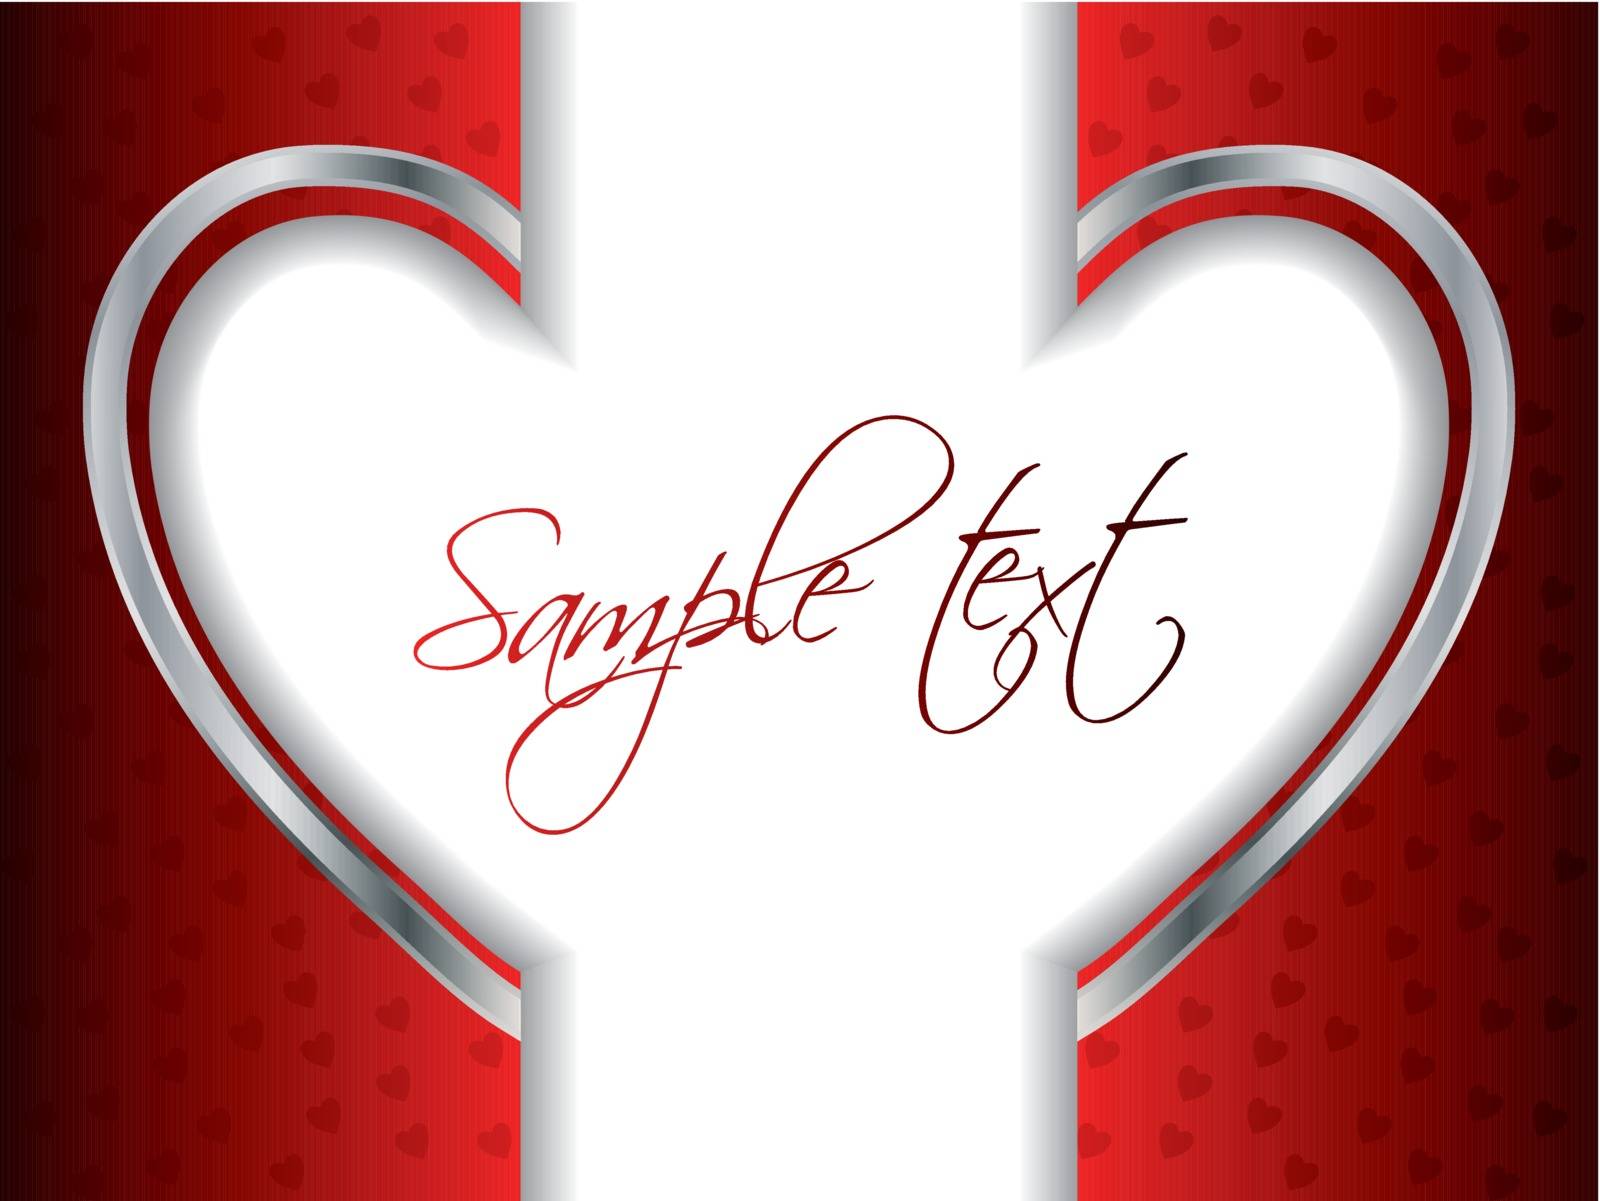 Split heart valentine card design background  in red and white